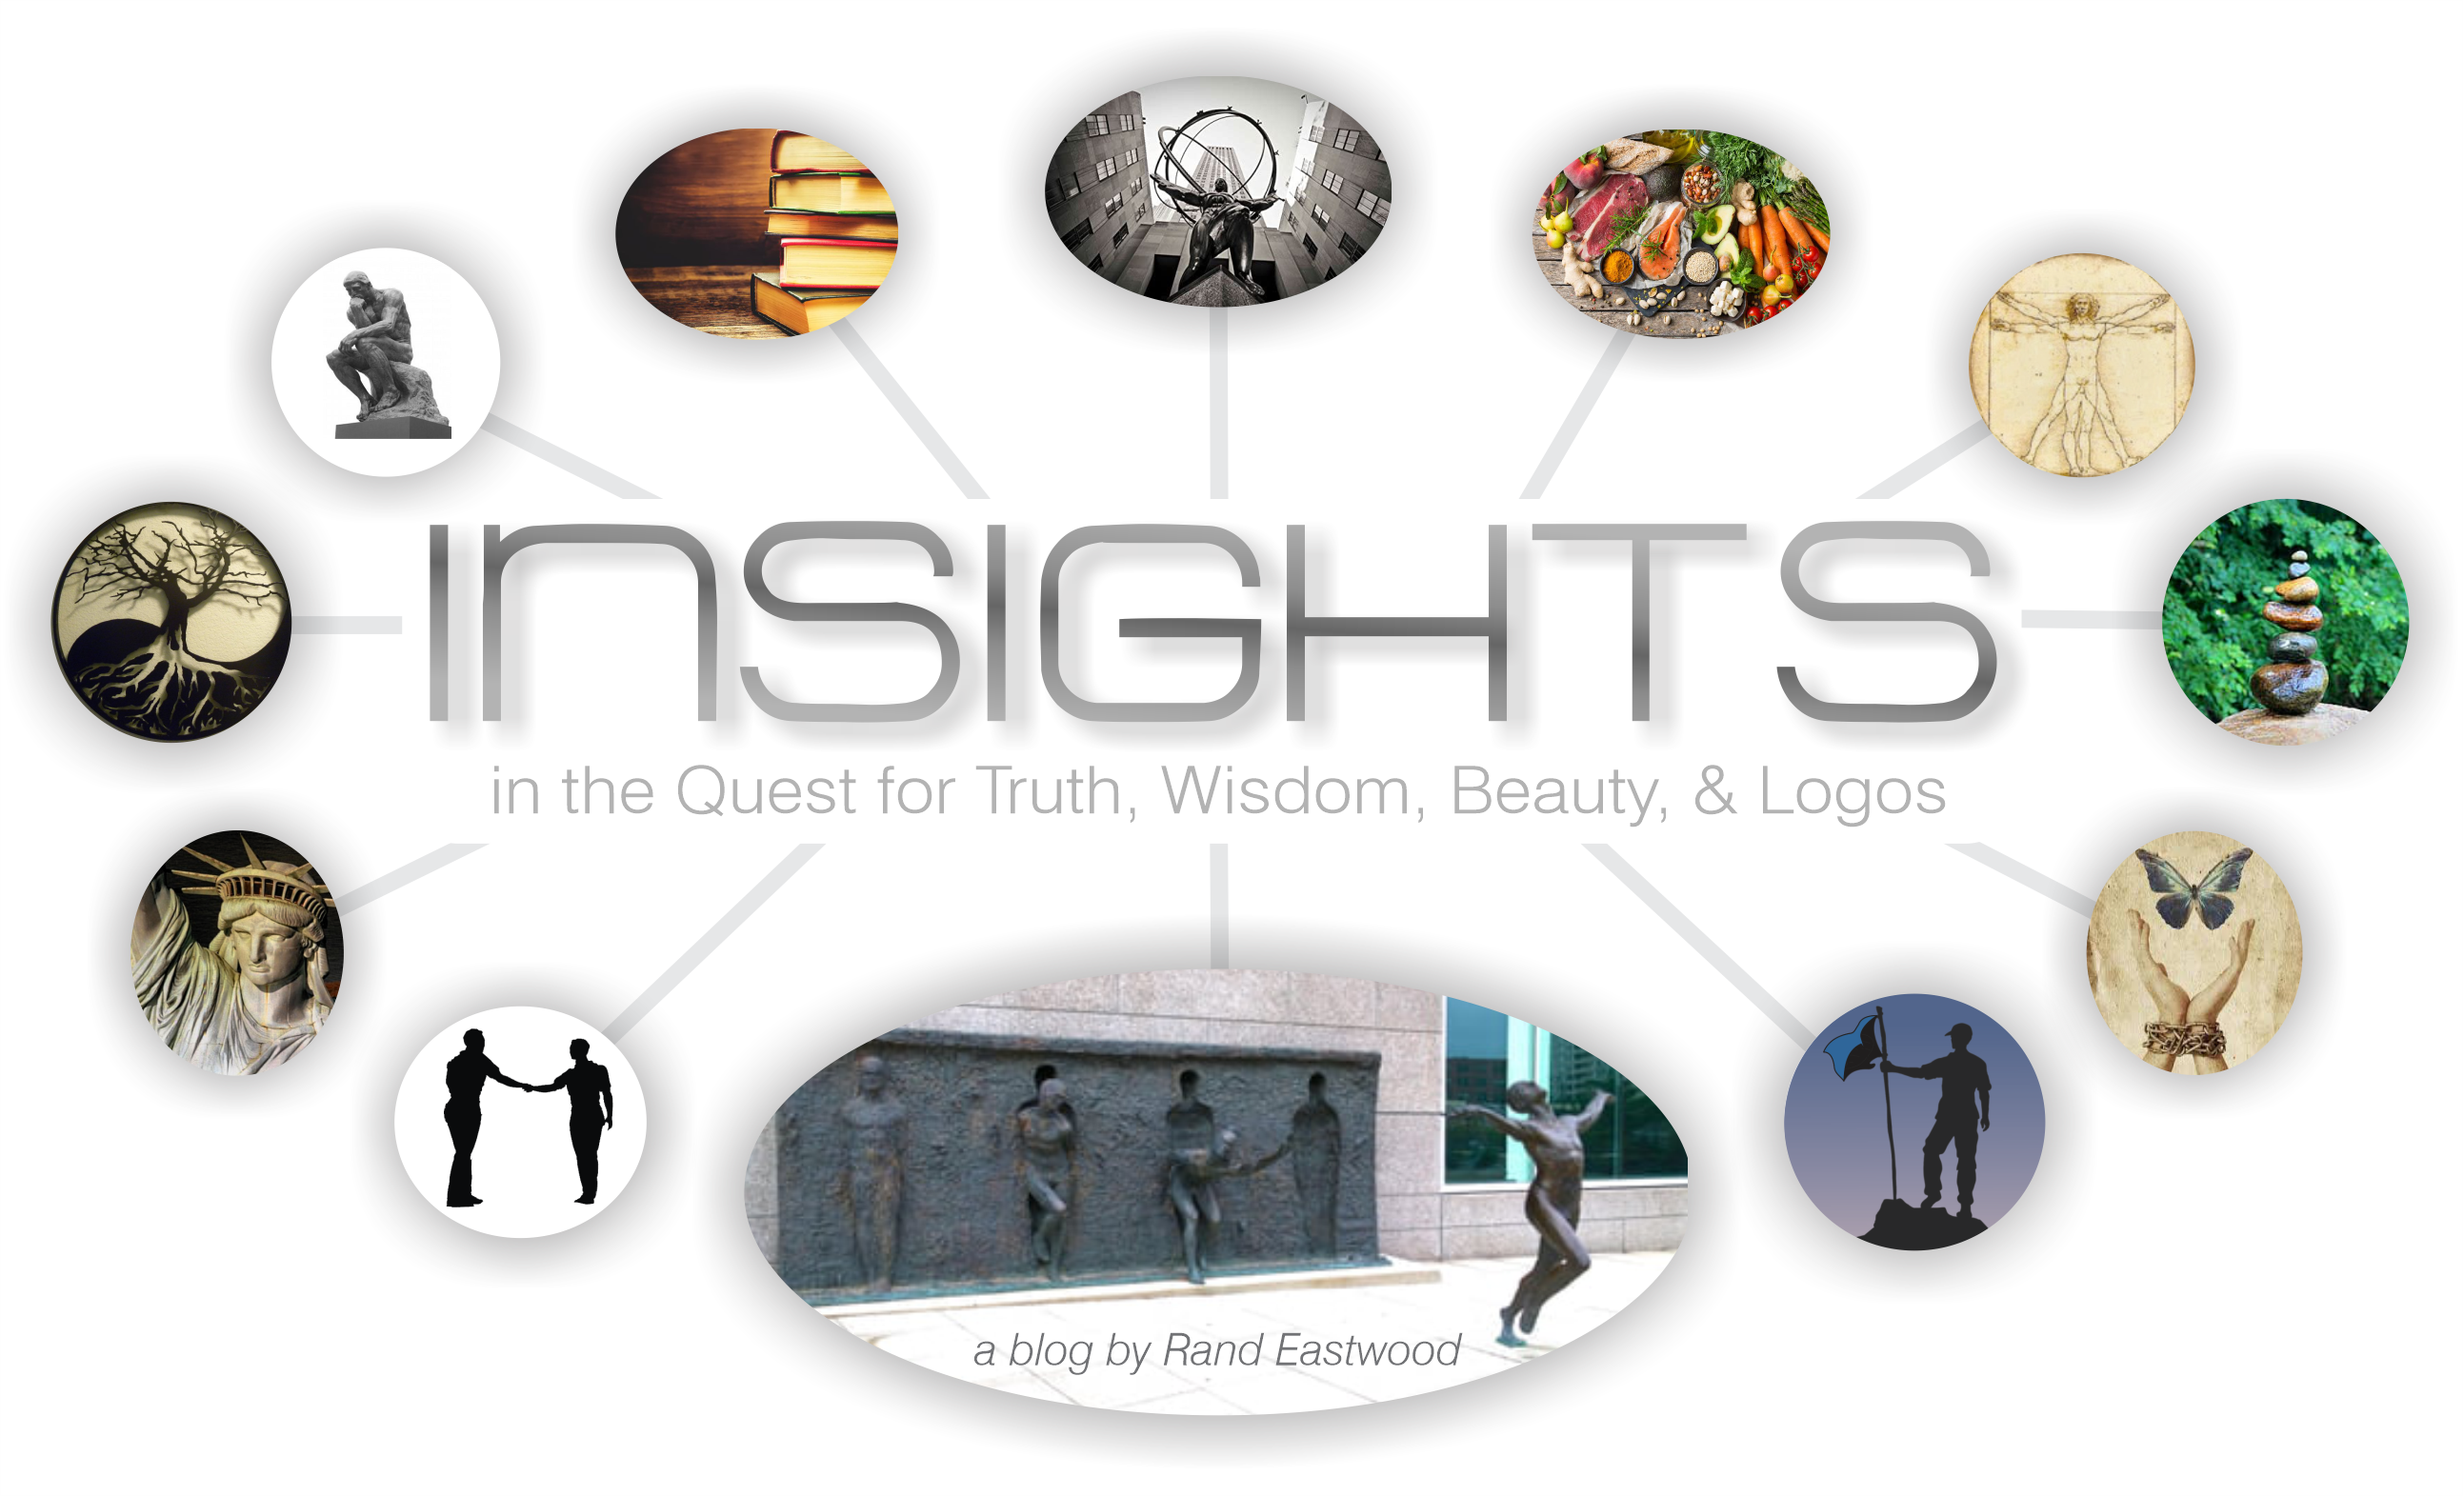 A Quest for Truth, Wisdom, Beauty, & Logos